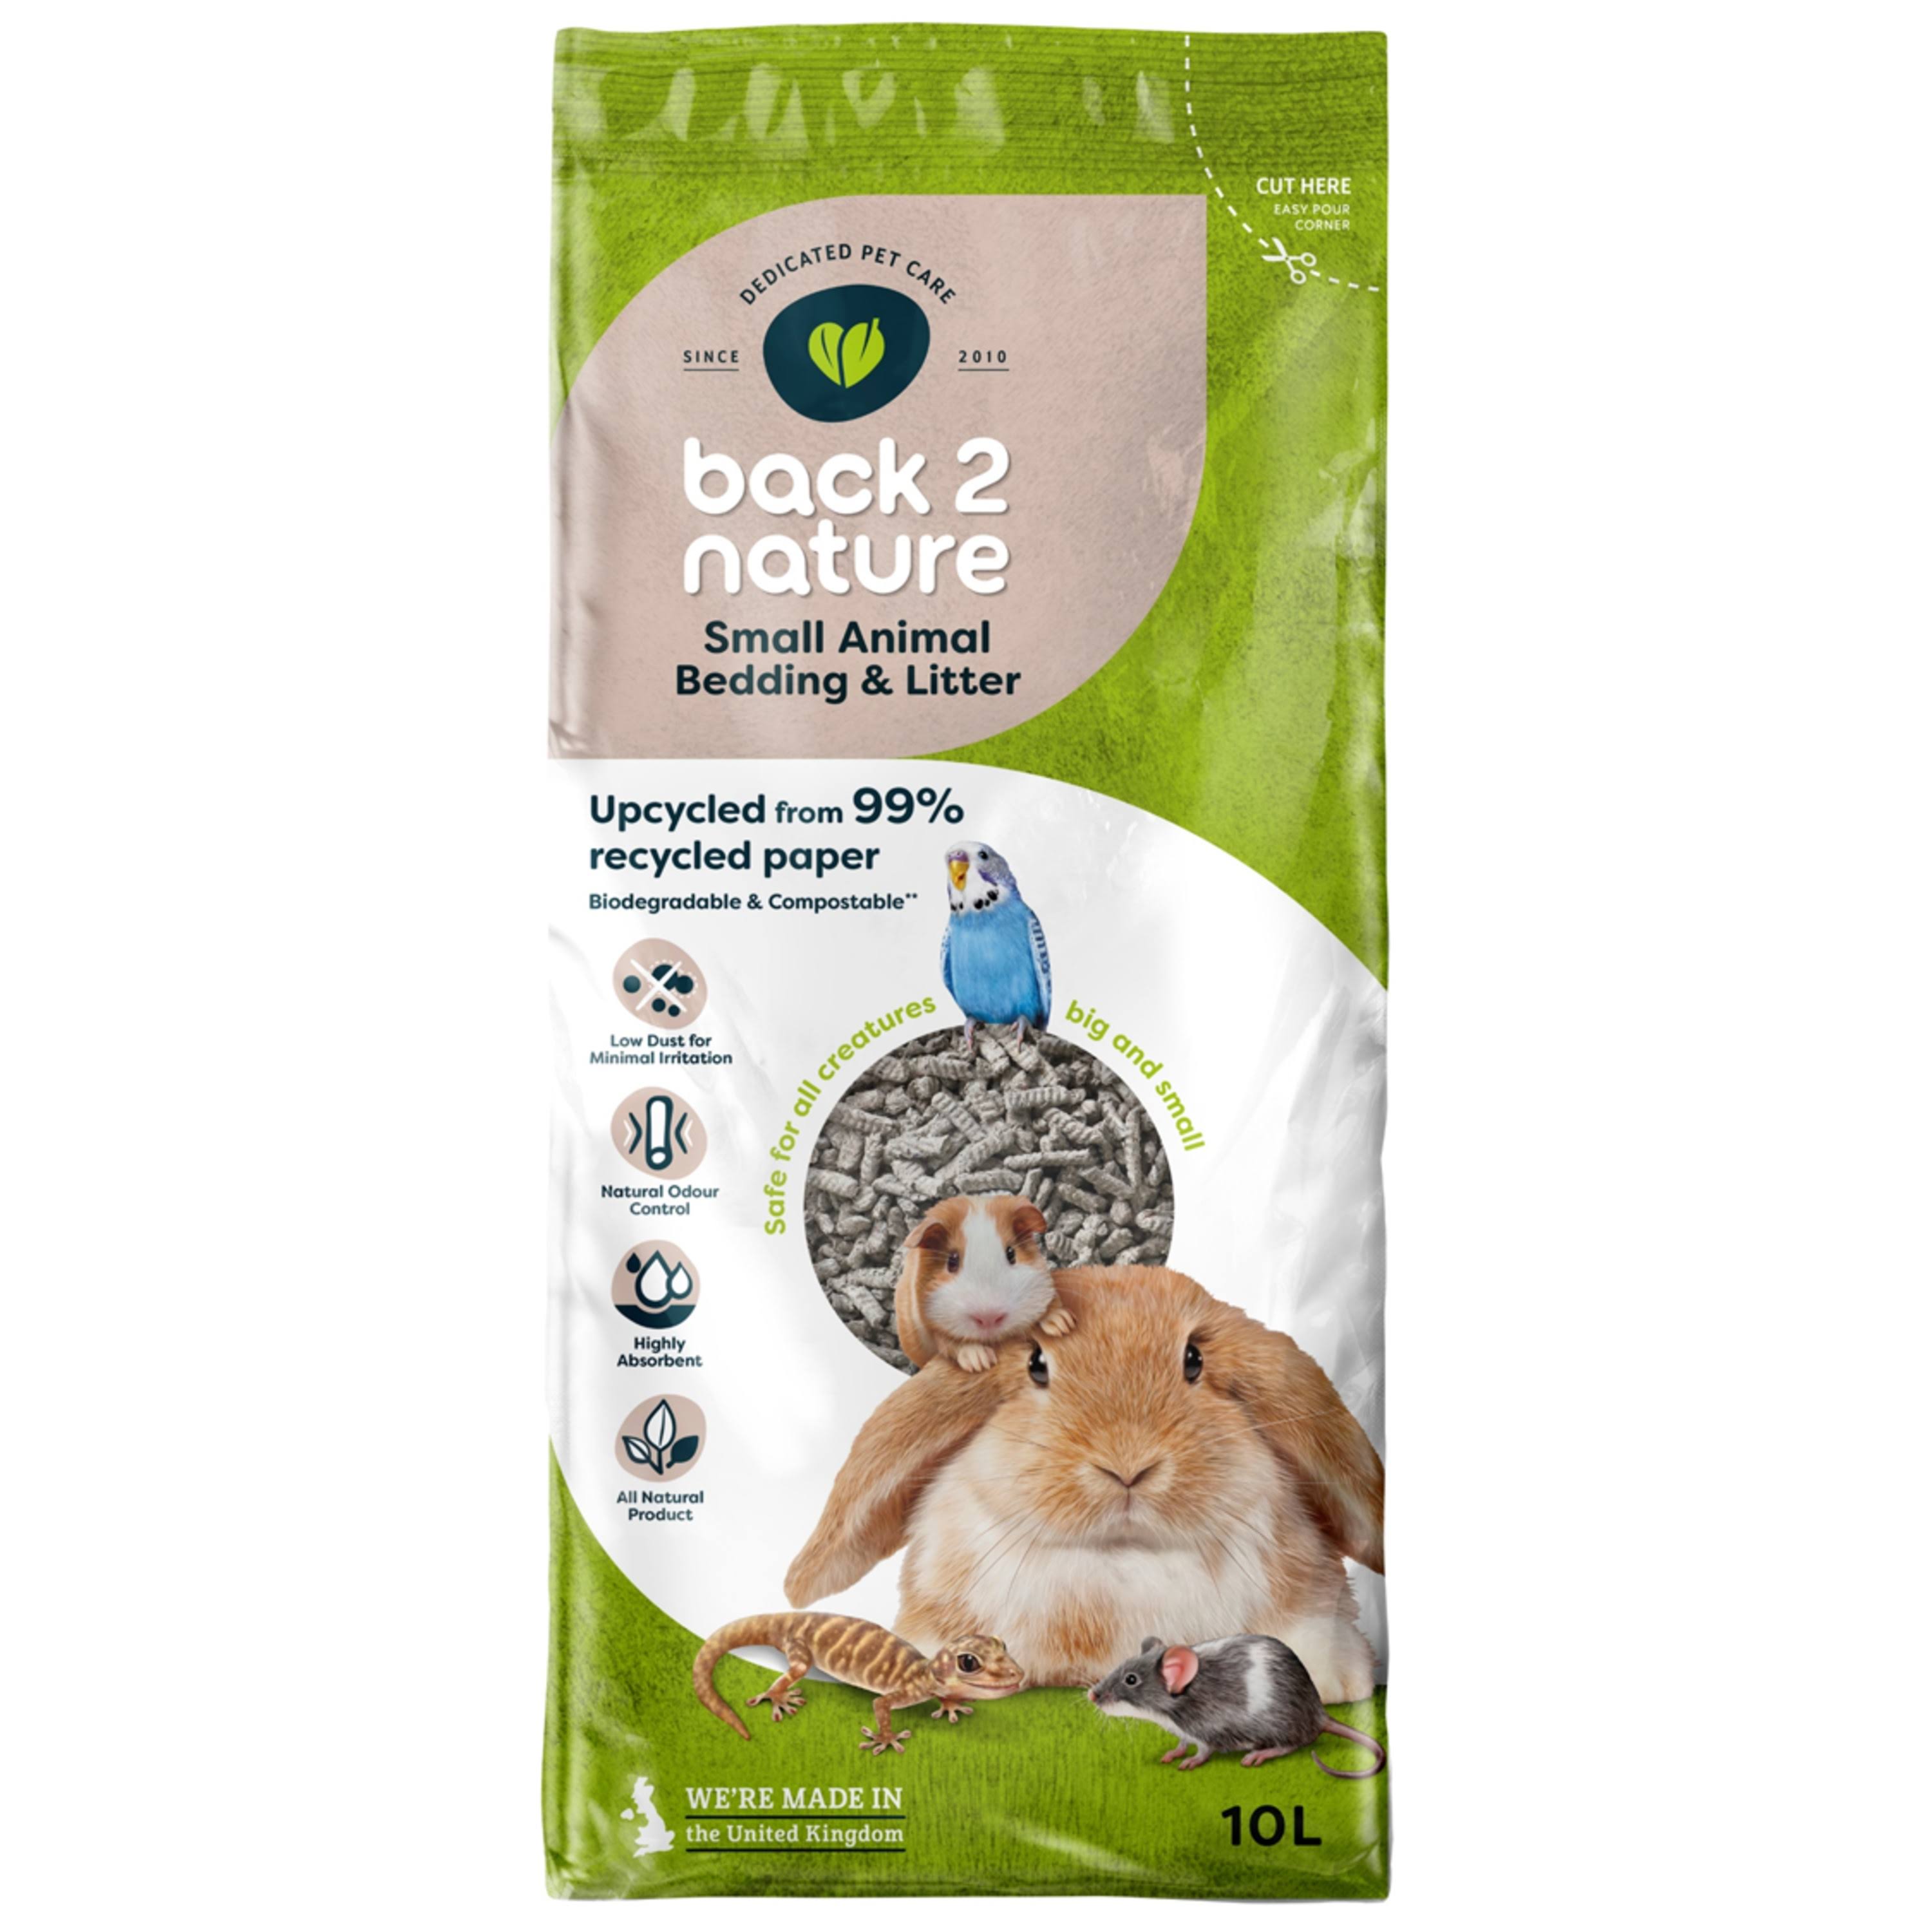 Back 2 Nature Small Animal Bedding & Litter - 10 L